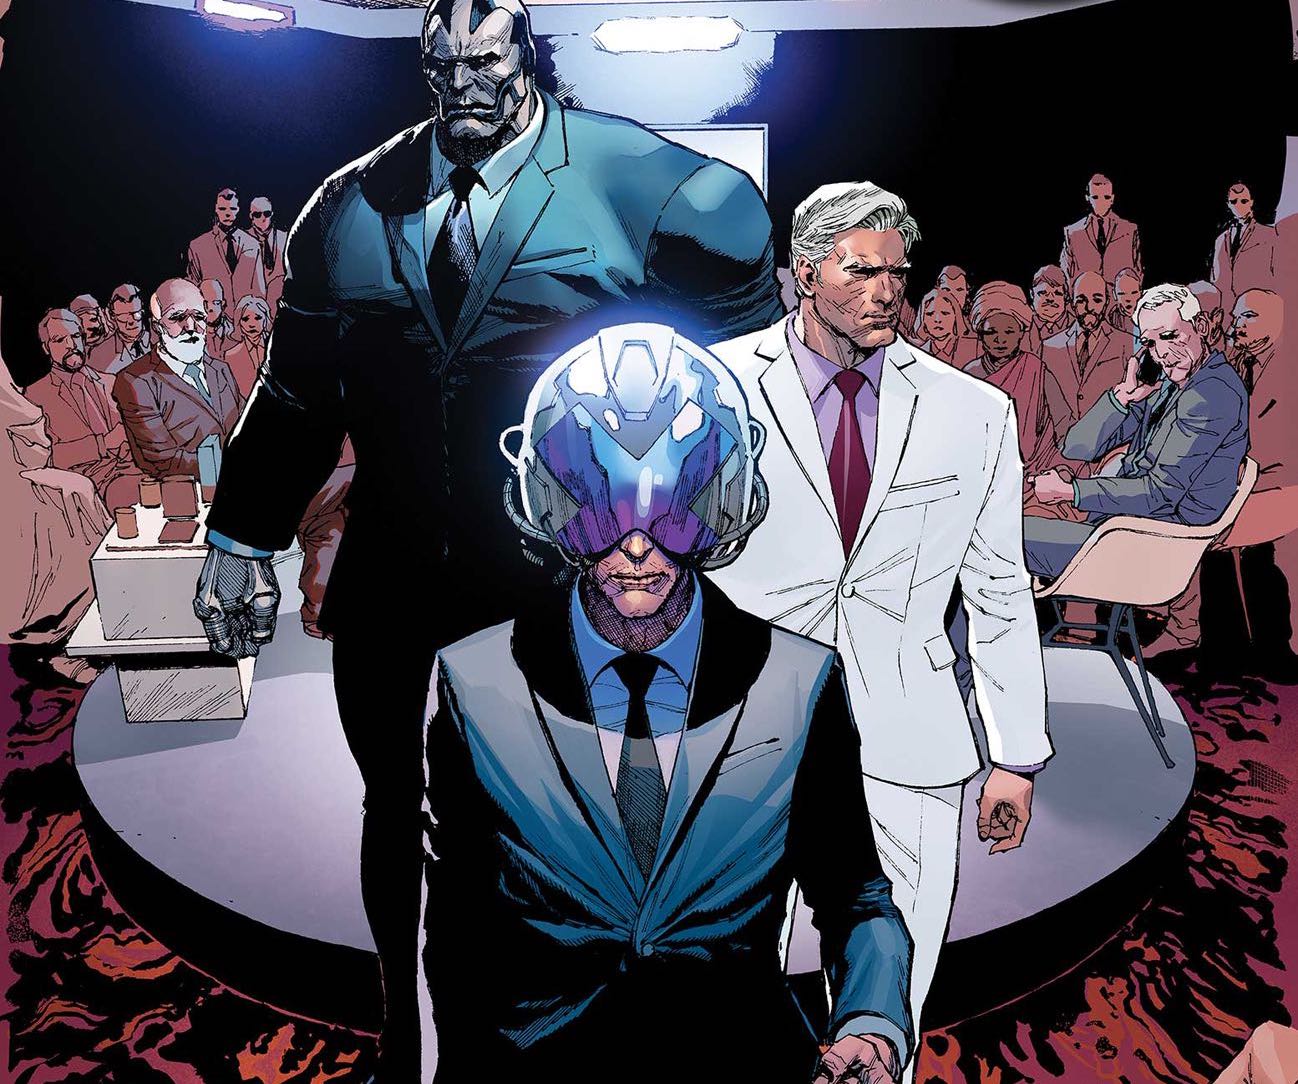 X-Men #4 review: Expertly draws your interest and makes you thirsty for more